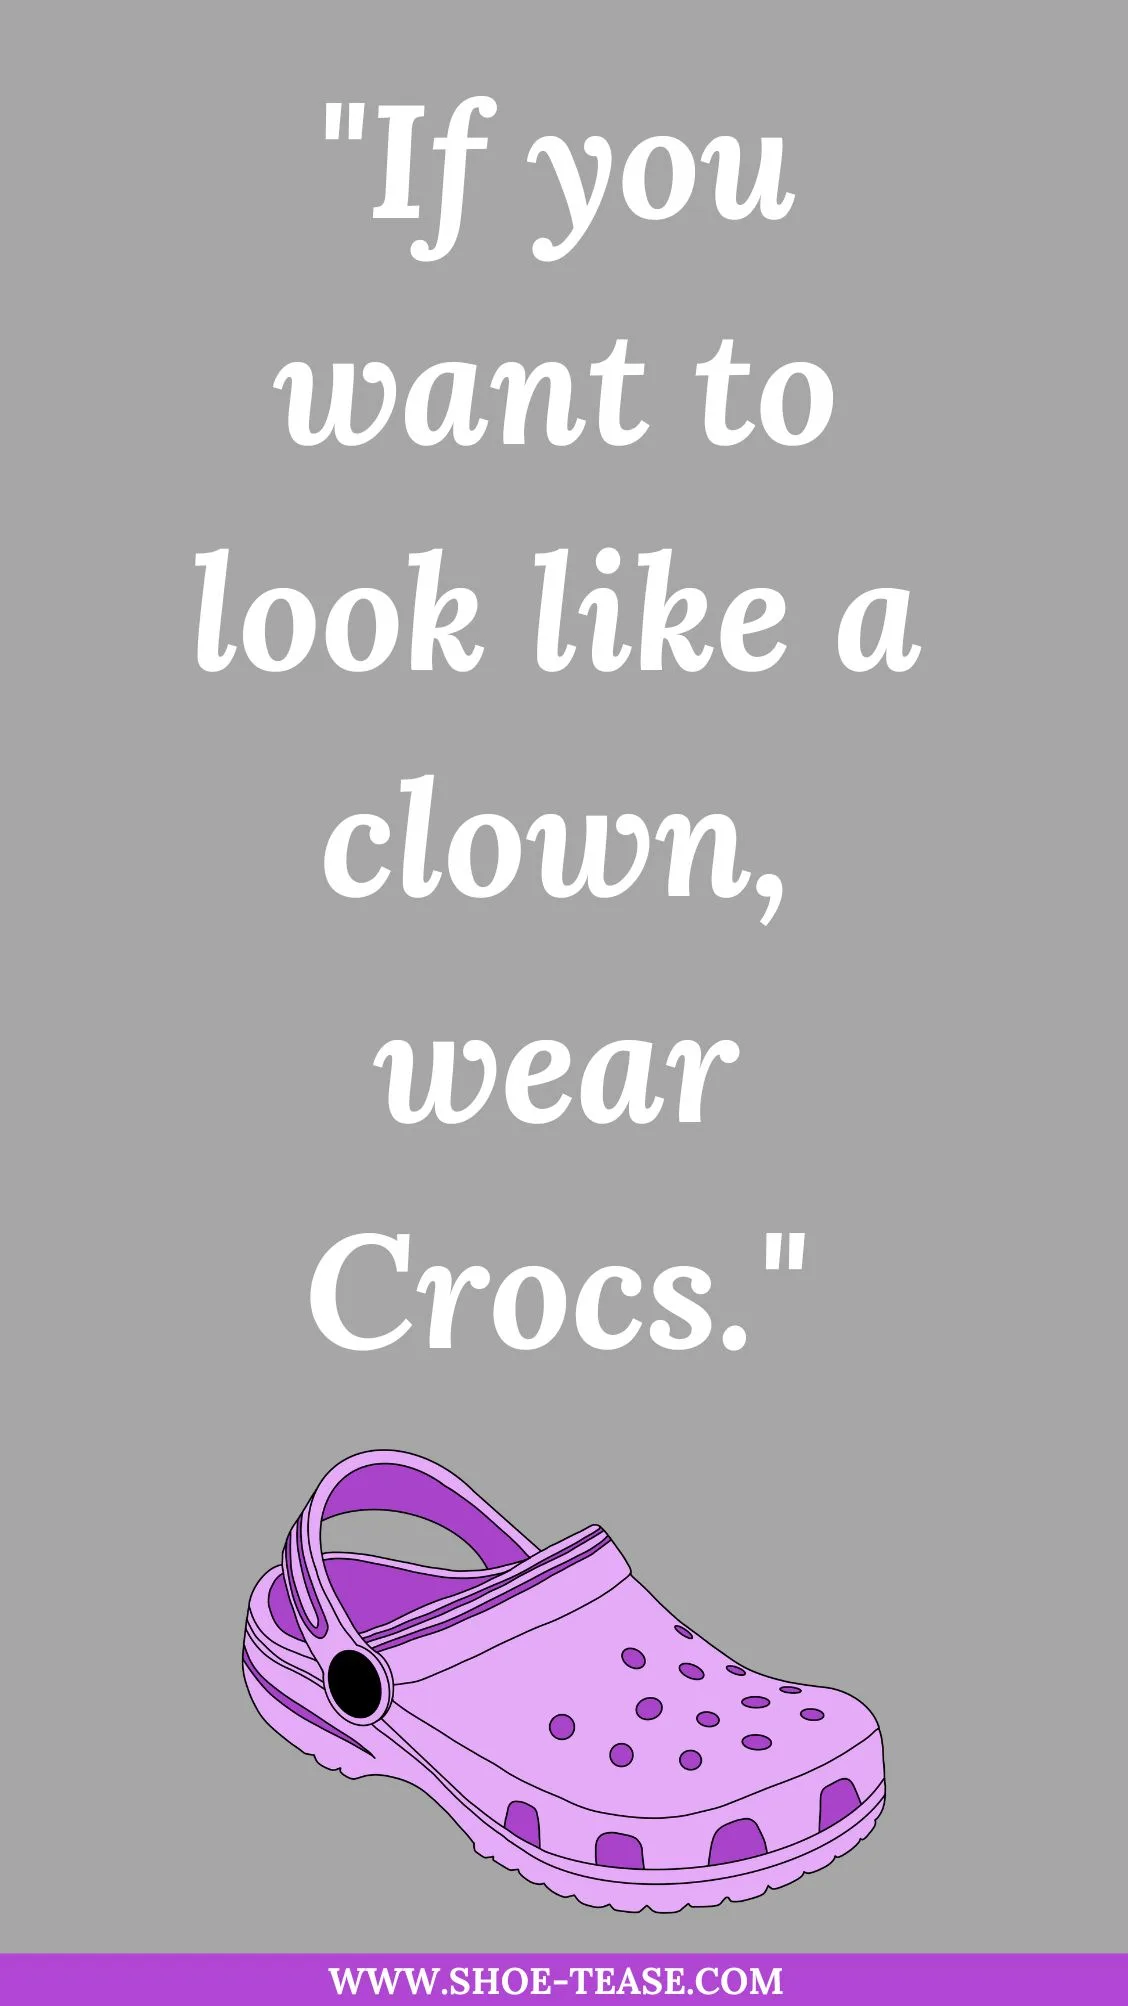 Crocs quotes reading if you want to look like a clown wear Crocs.